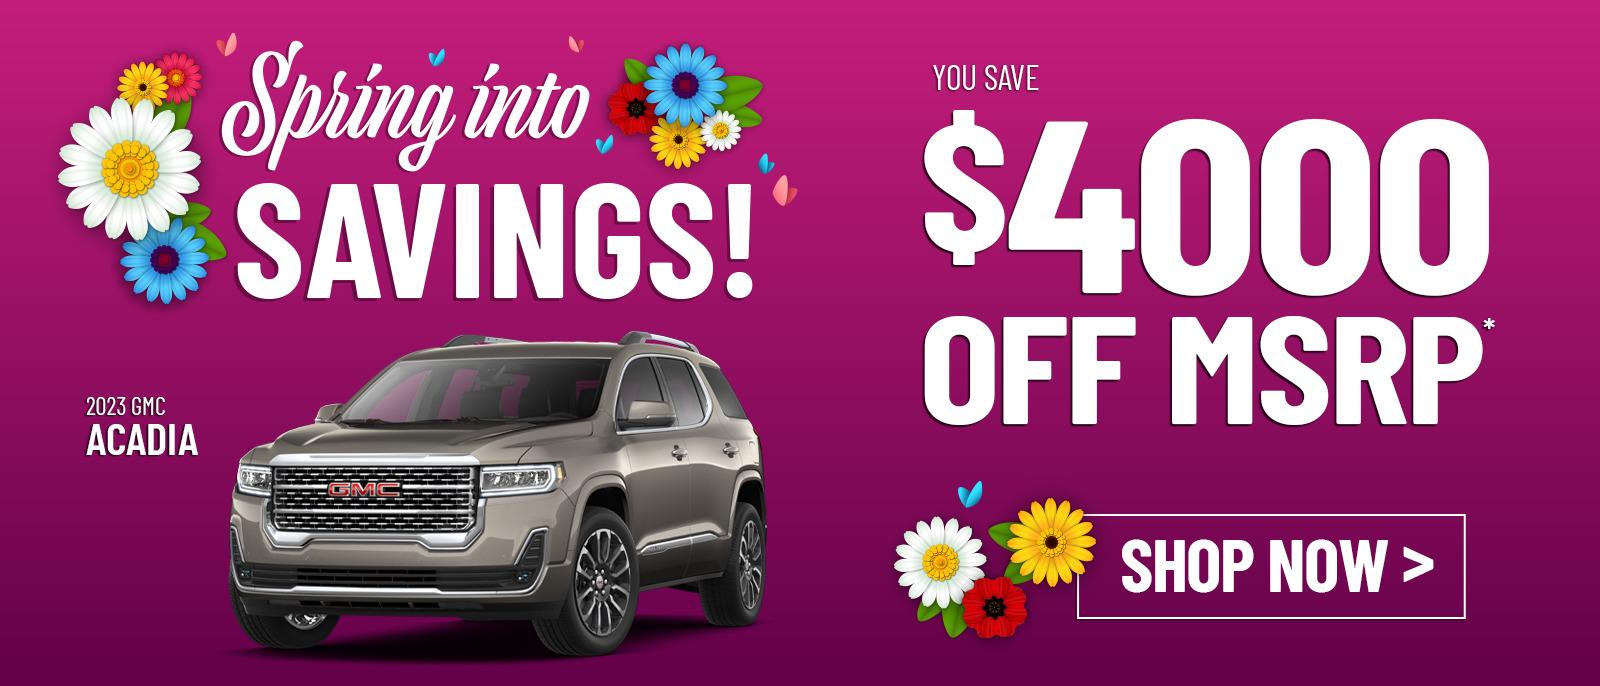 2023 GMC Acadia: You Save $4000 Off MSRP